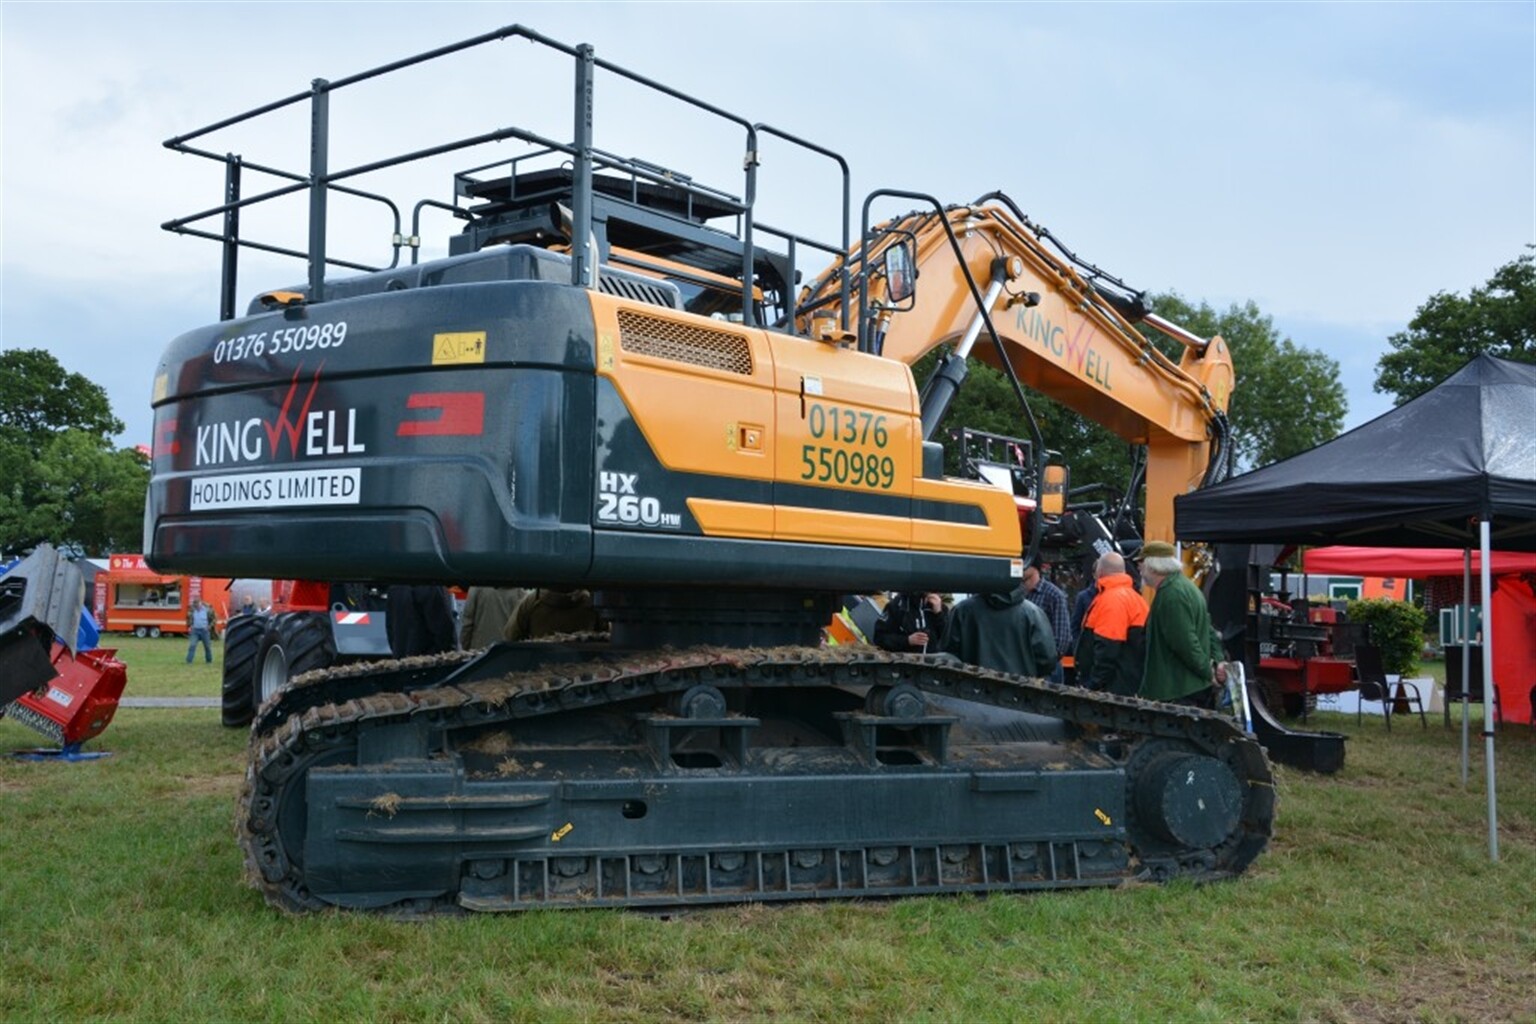 A day in the woods at the APF Forestry Show (Part One)